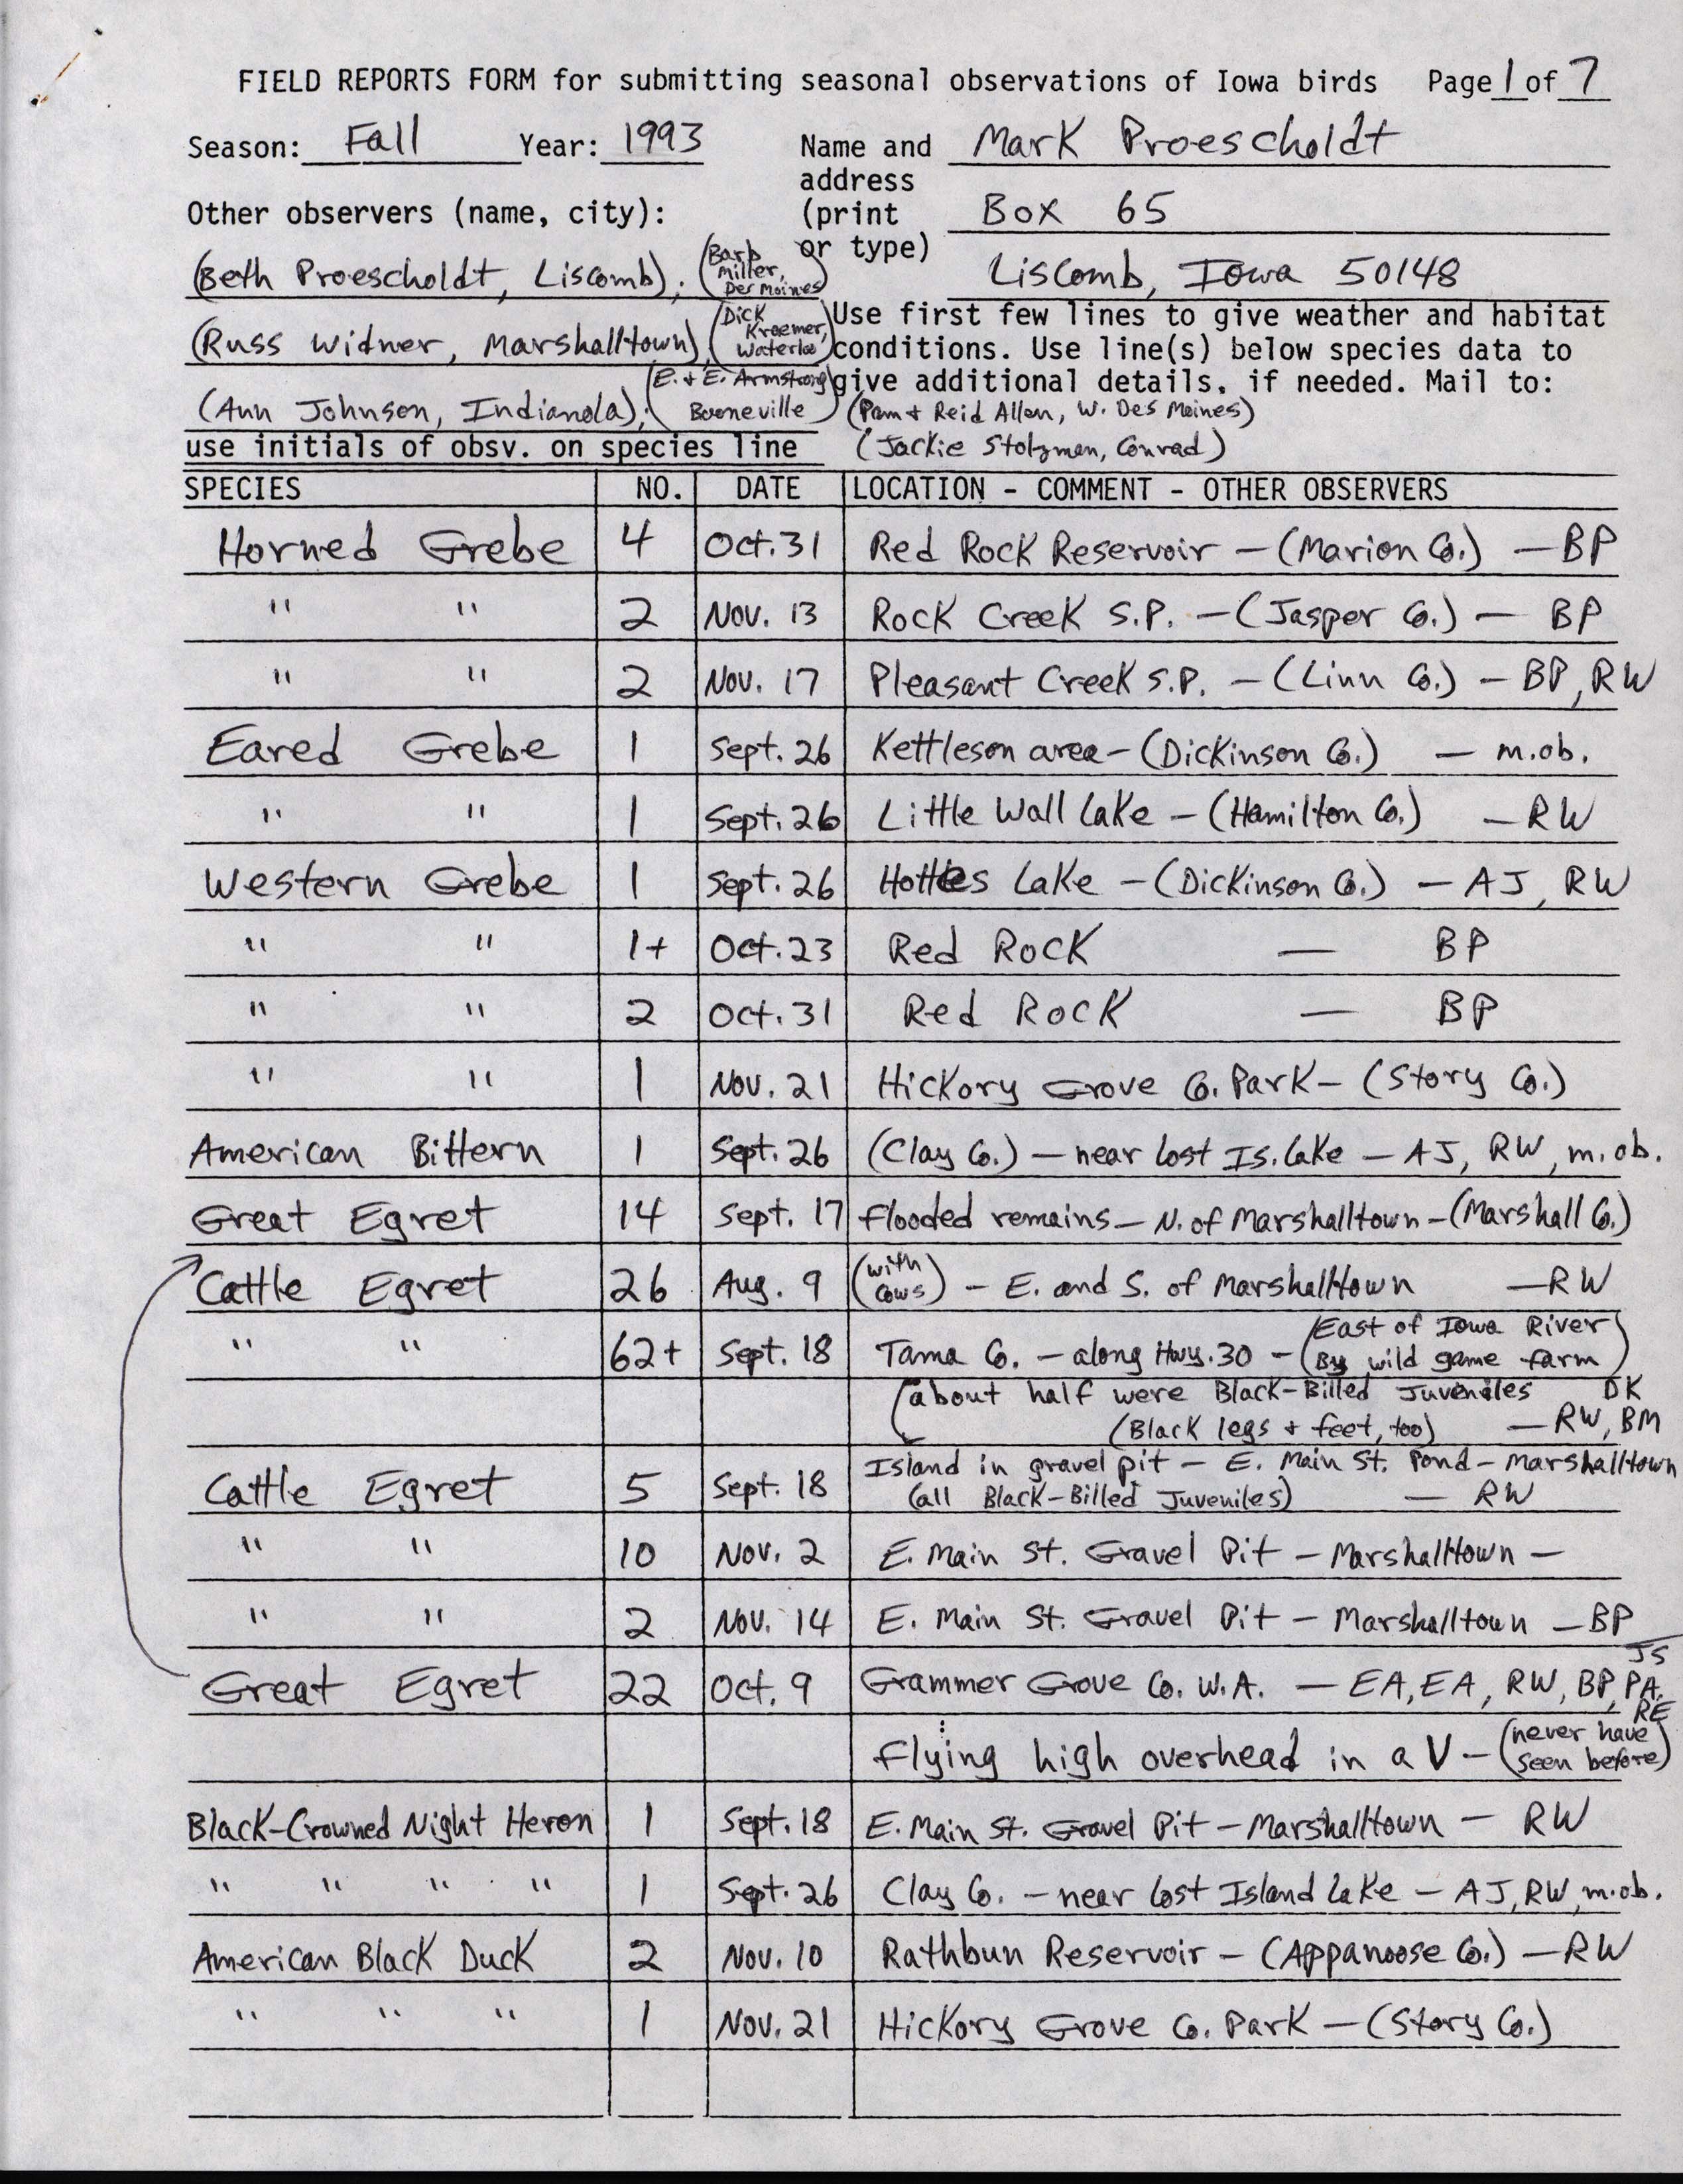 Field reports form for submitting seasonal observations of Iowa birds, Mark Proescholdt, fall 1993